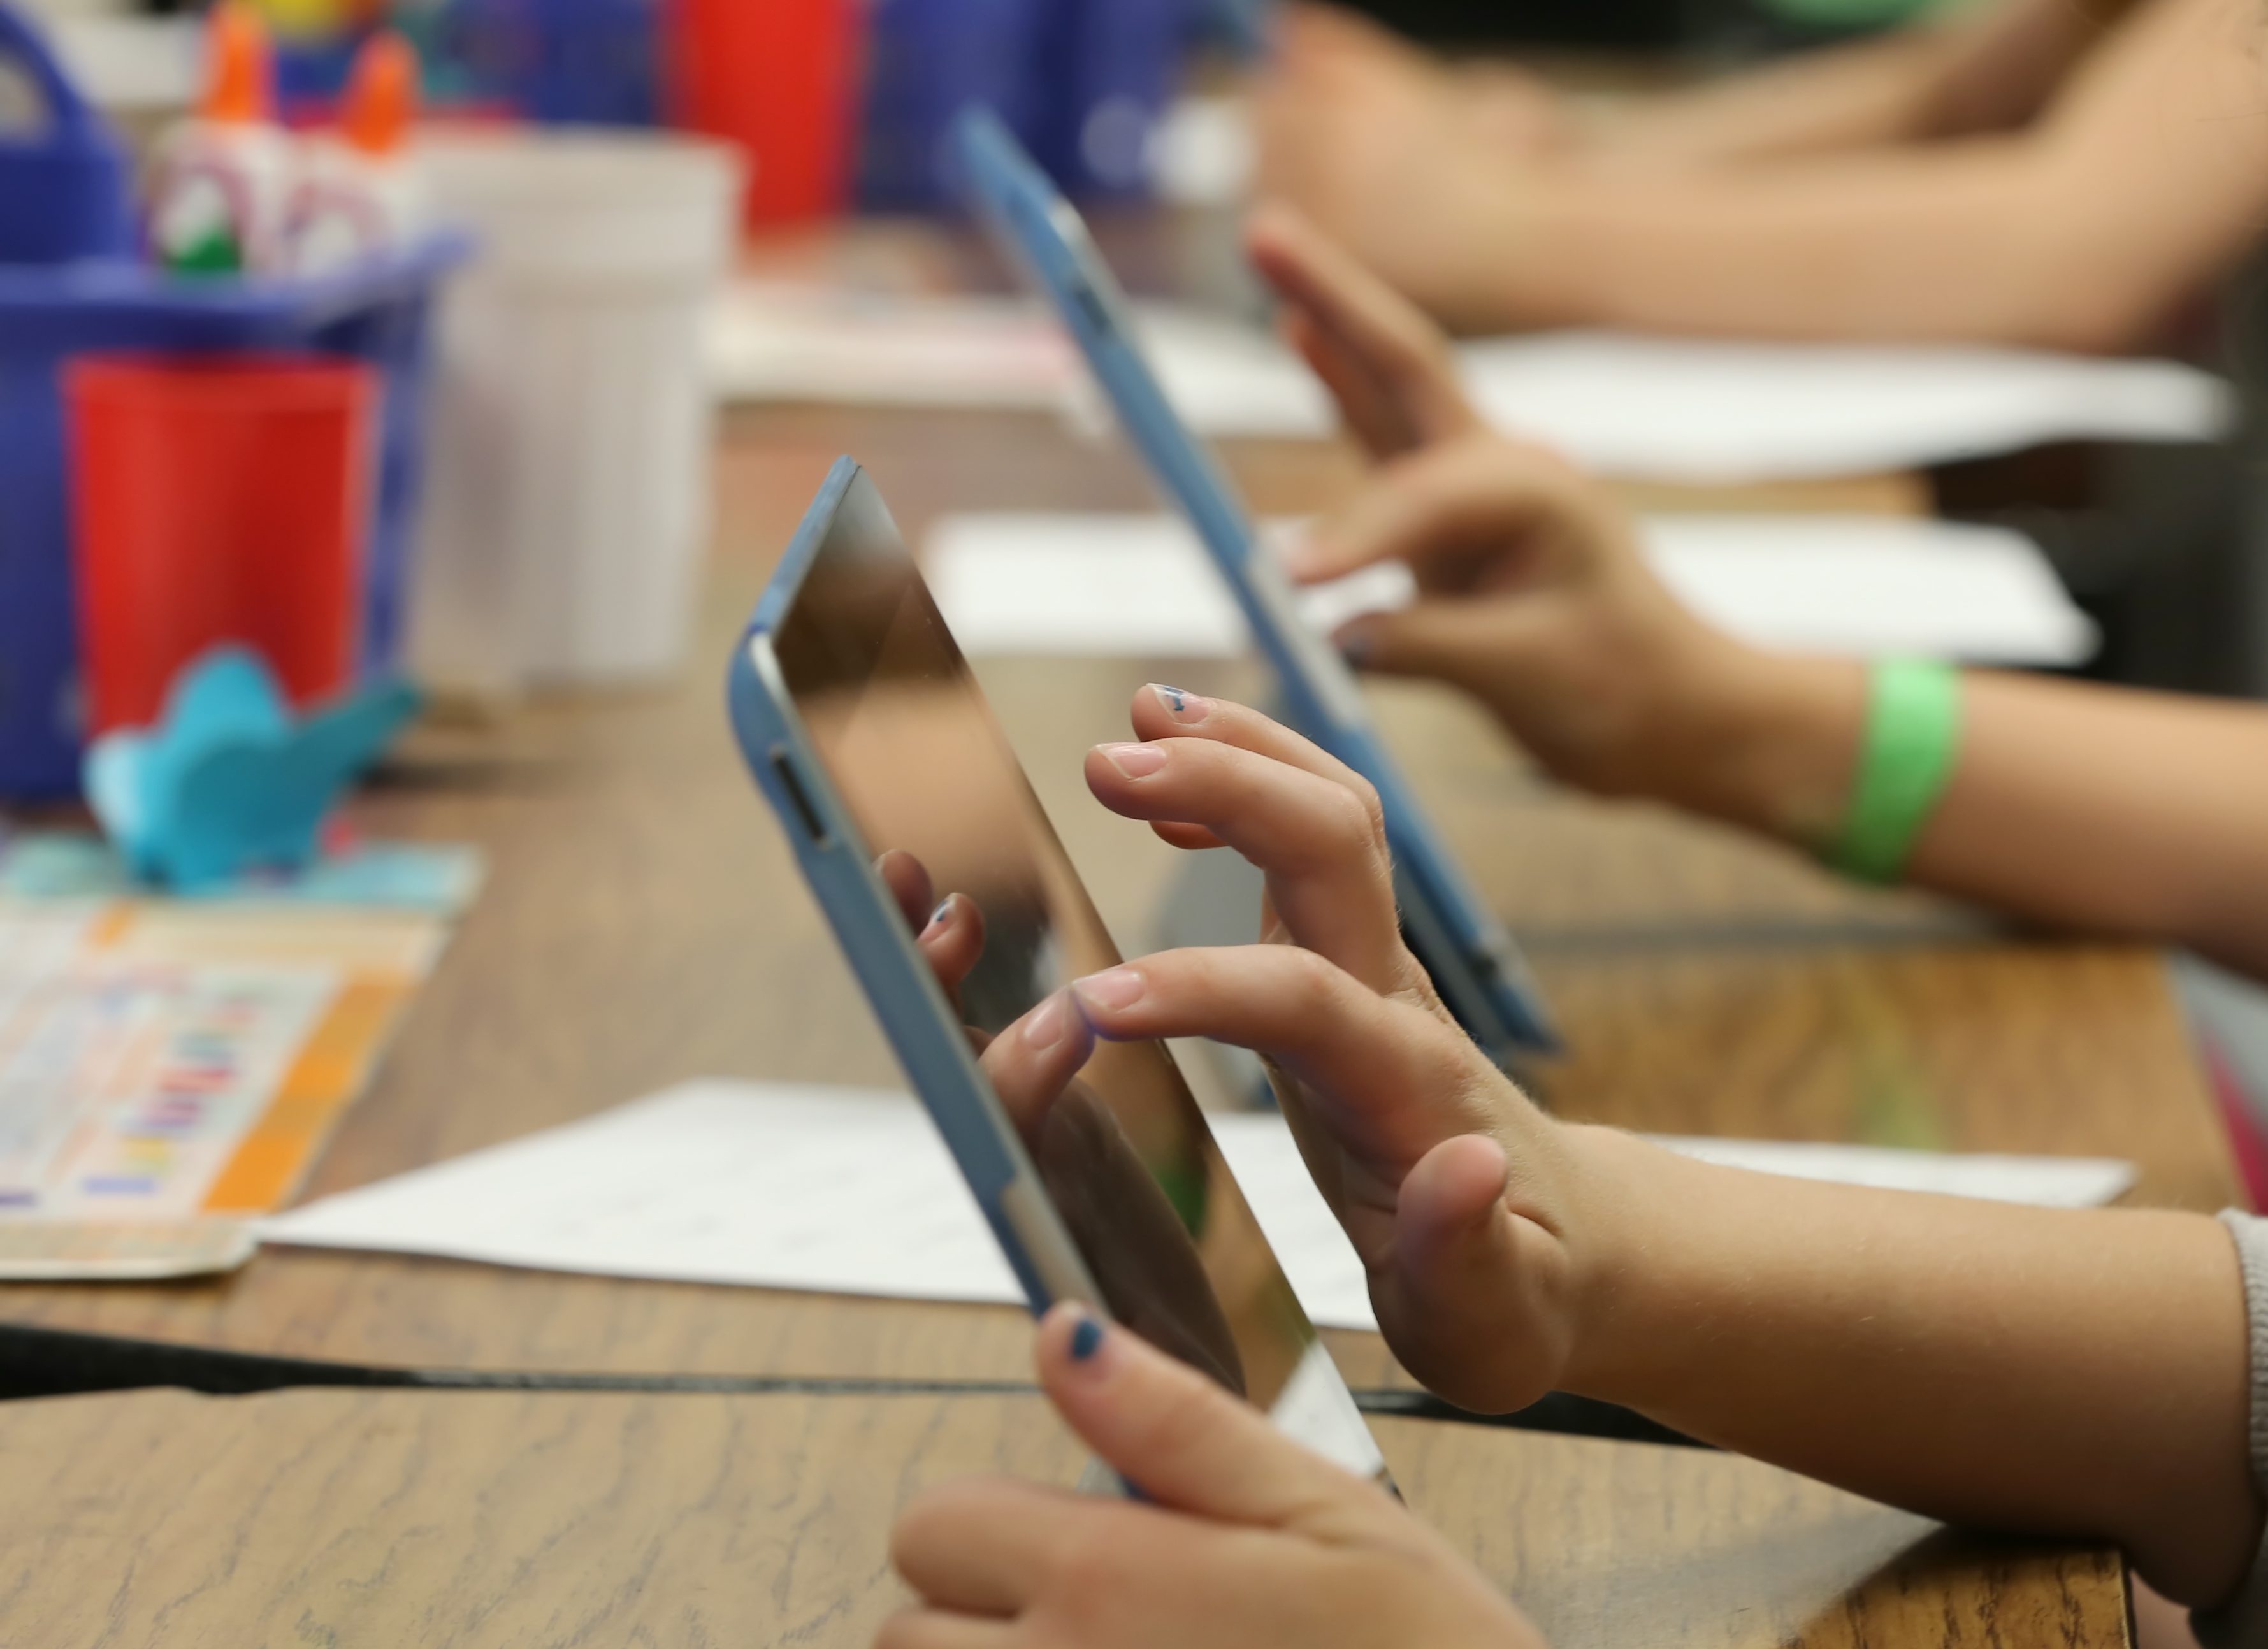 Second graders work on iPads as part of their classroom work in a Utah elementary school on Monday, May 20, 2013. (George Frey—Bloomberg/Getty Images)